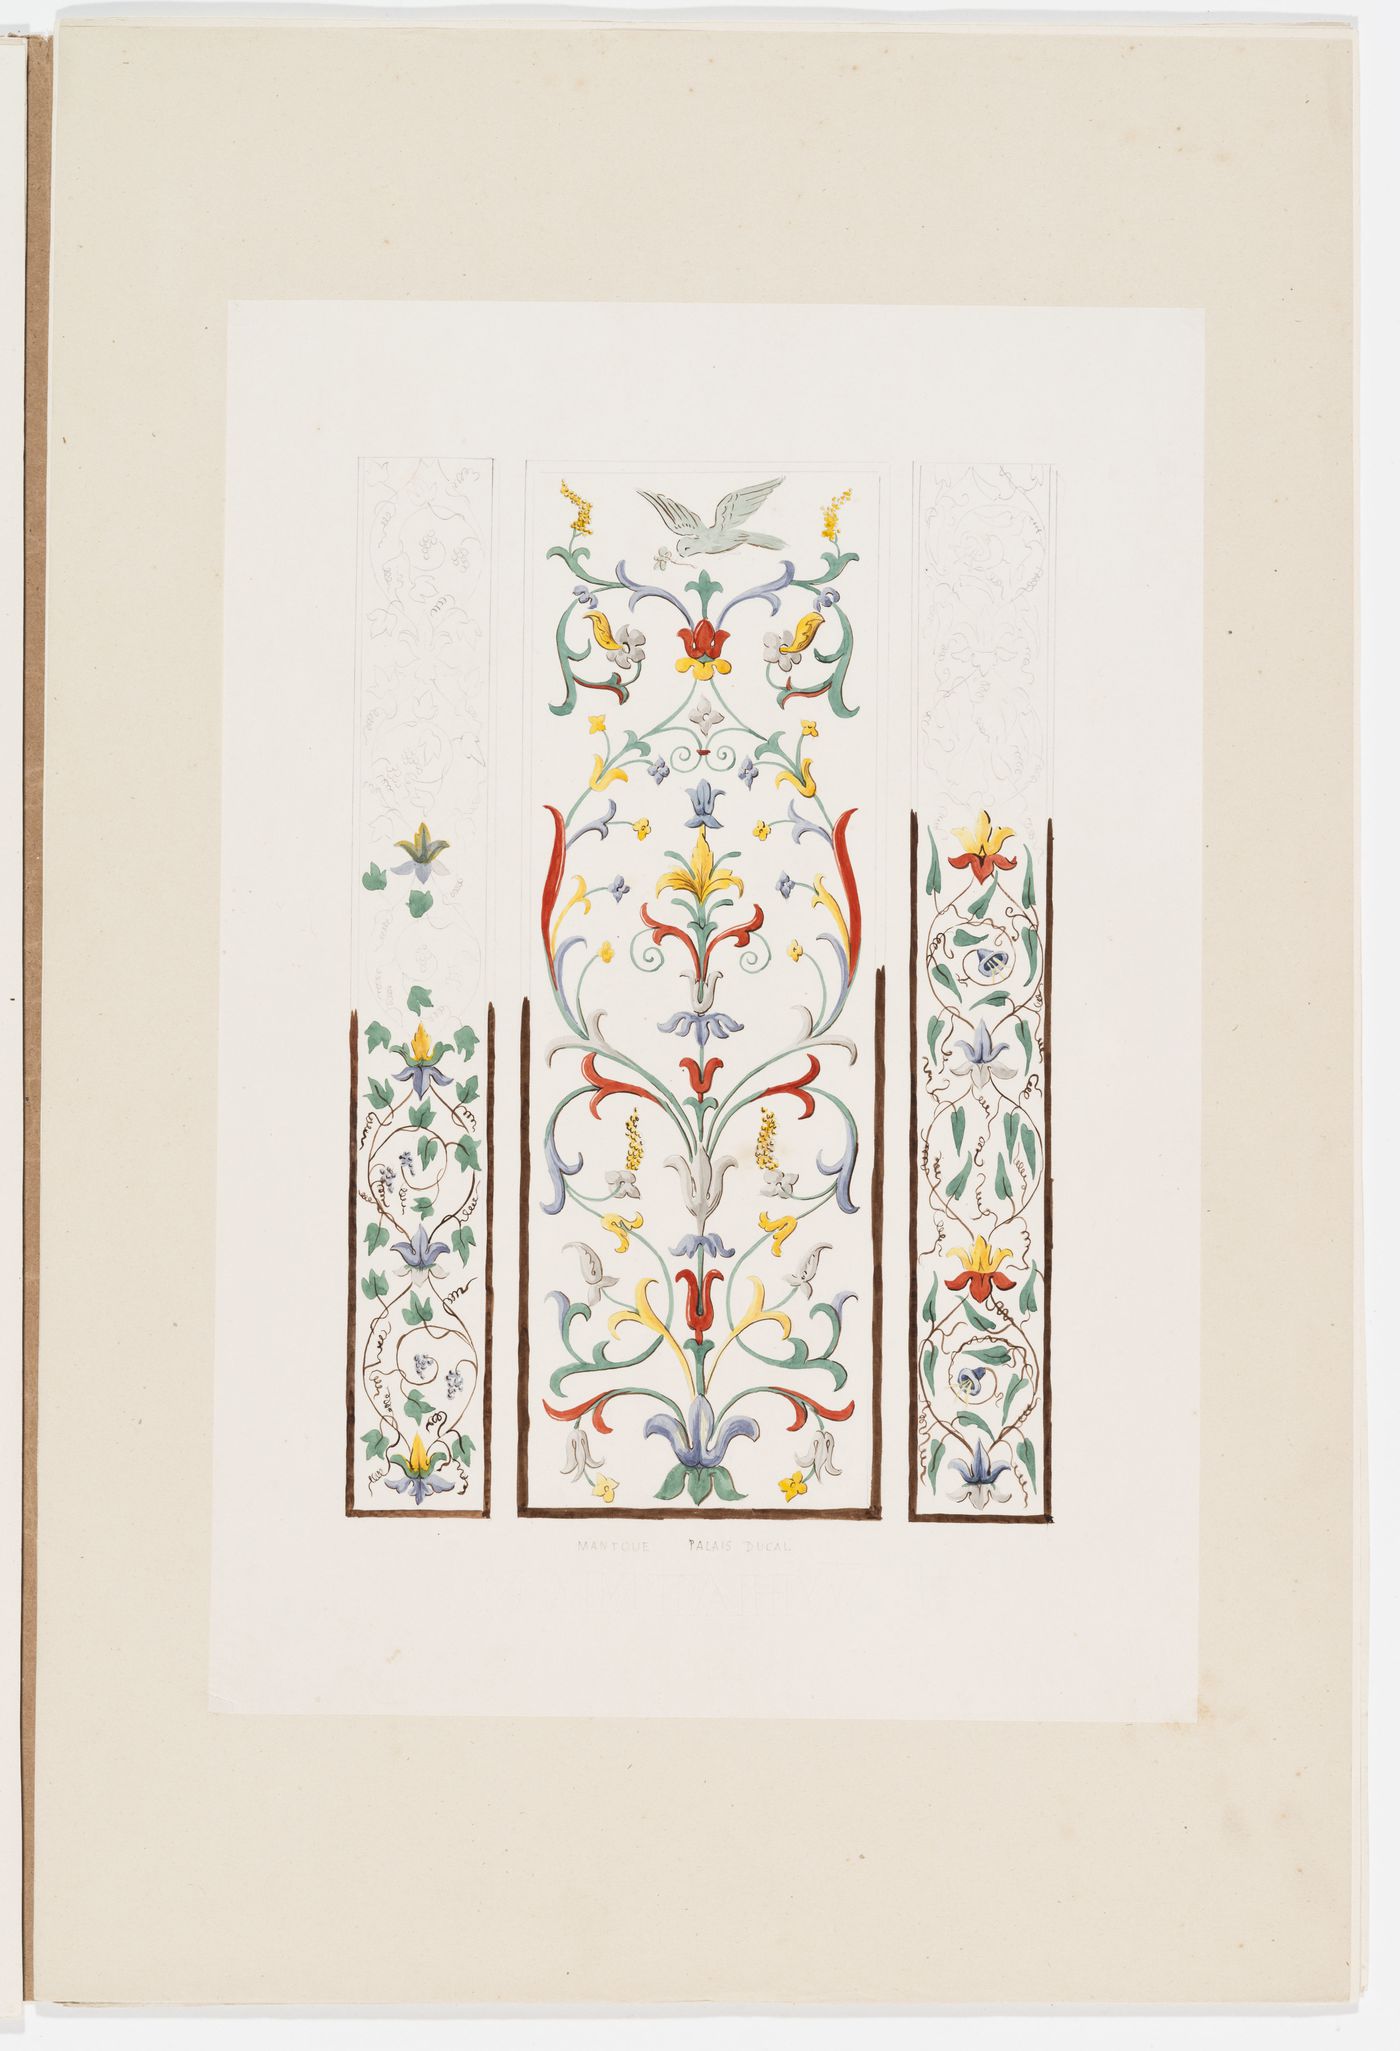 Ornament drawing of three bands decorated with arabesques from the Palazzo ducale, Mantua